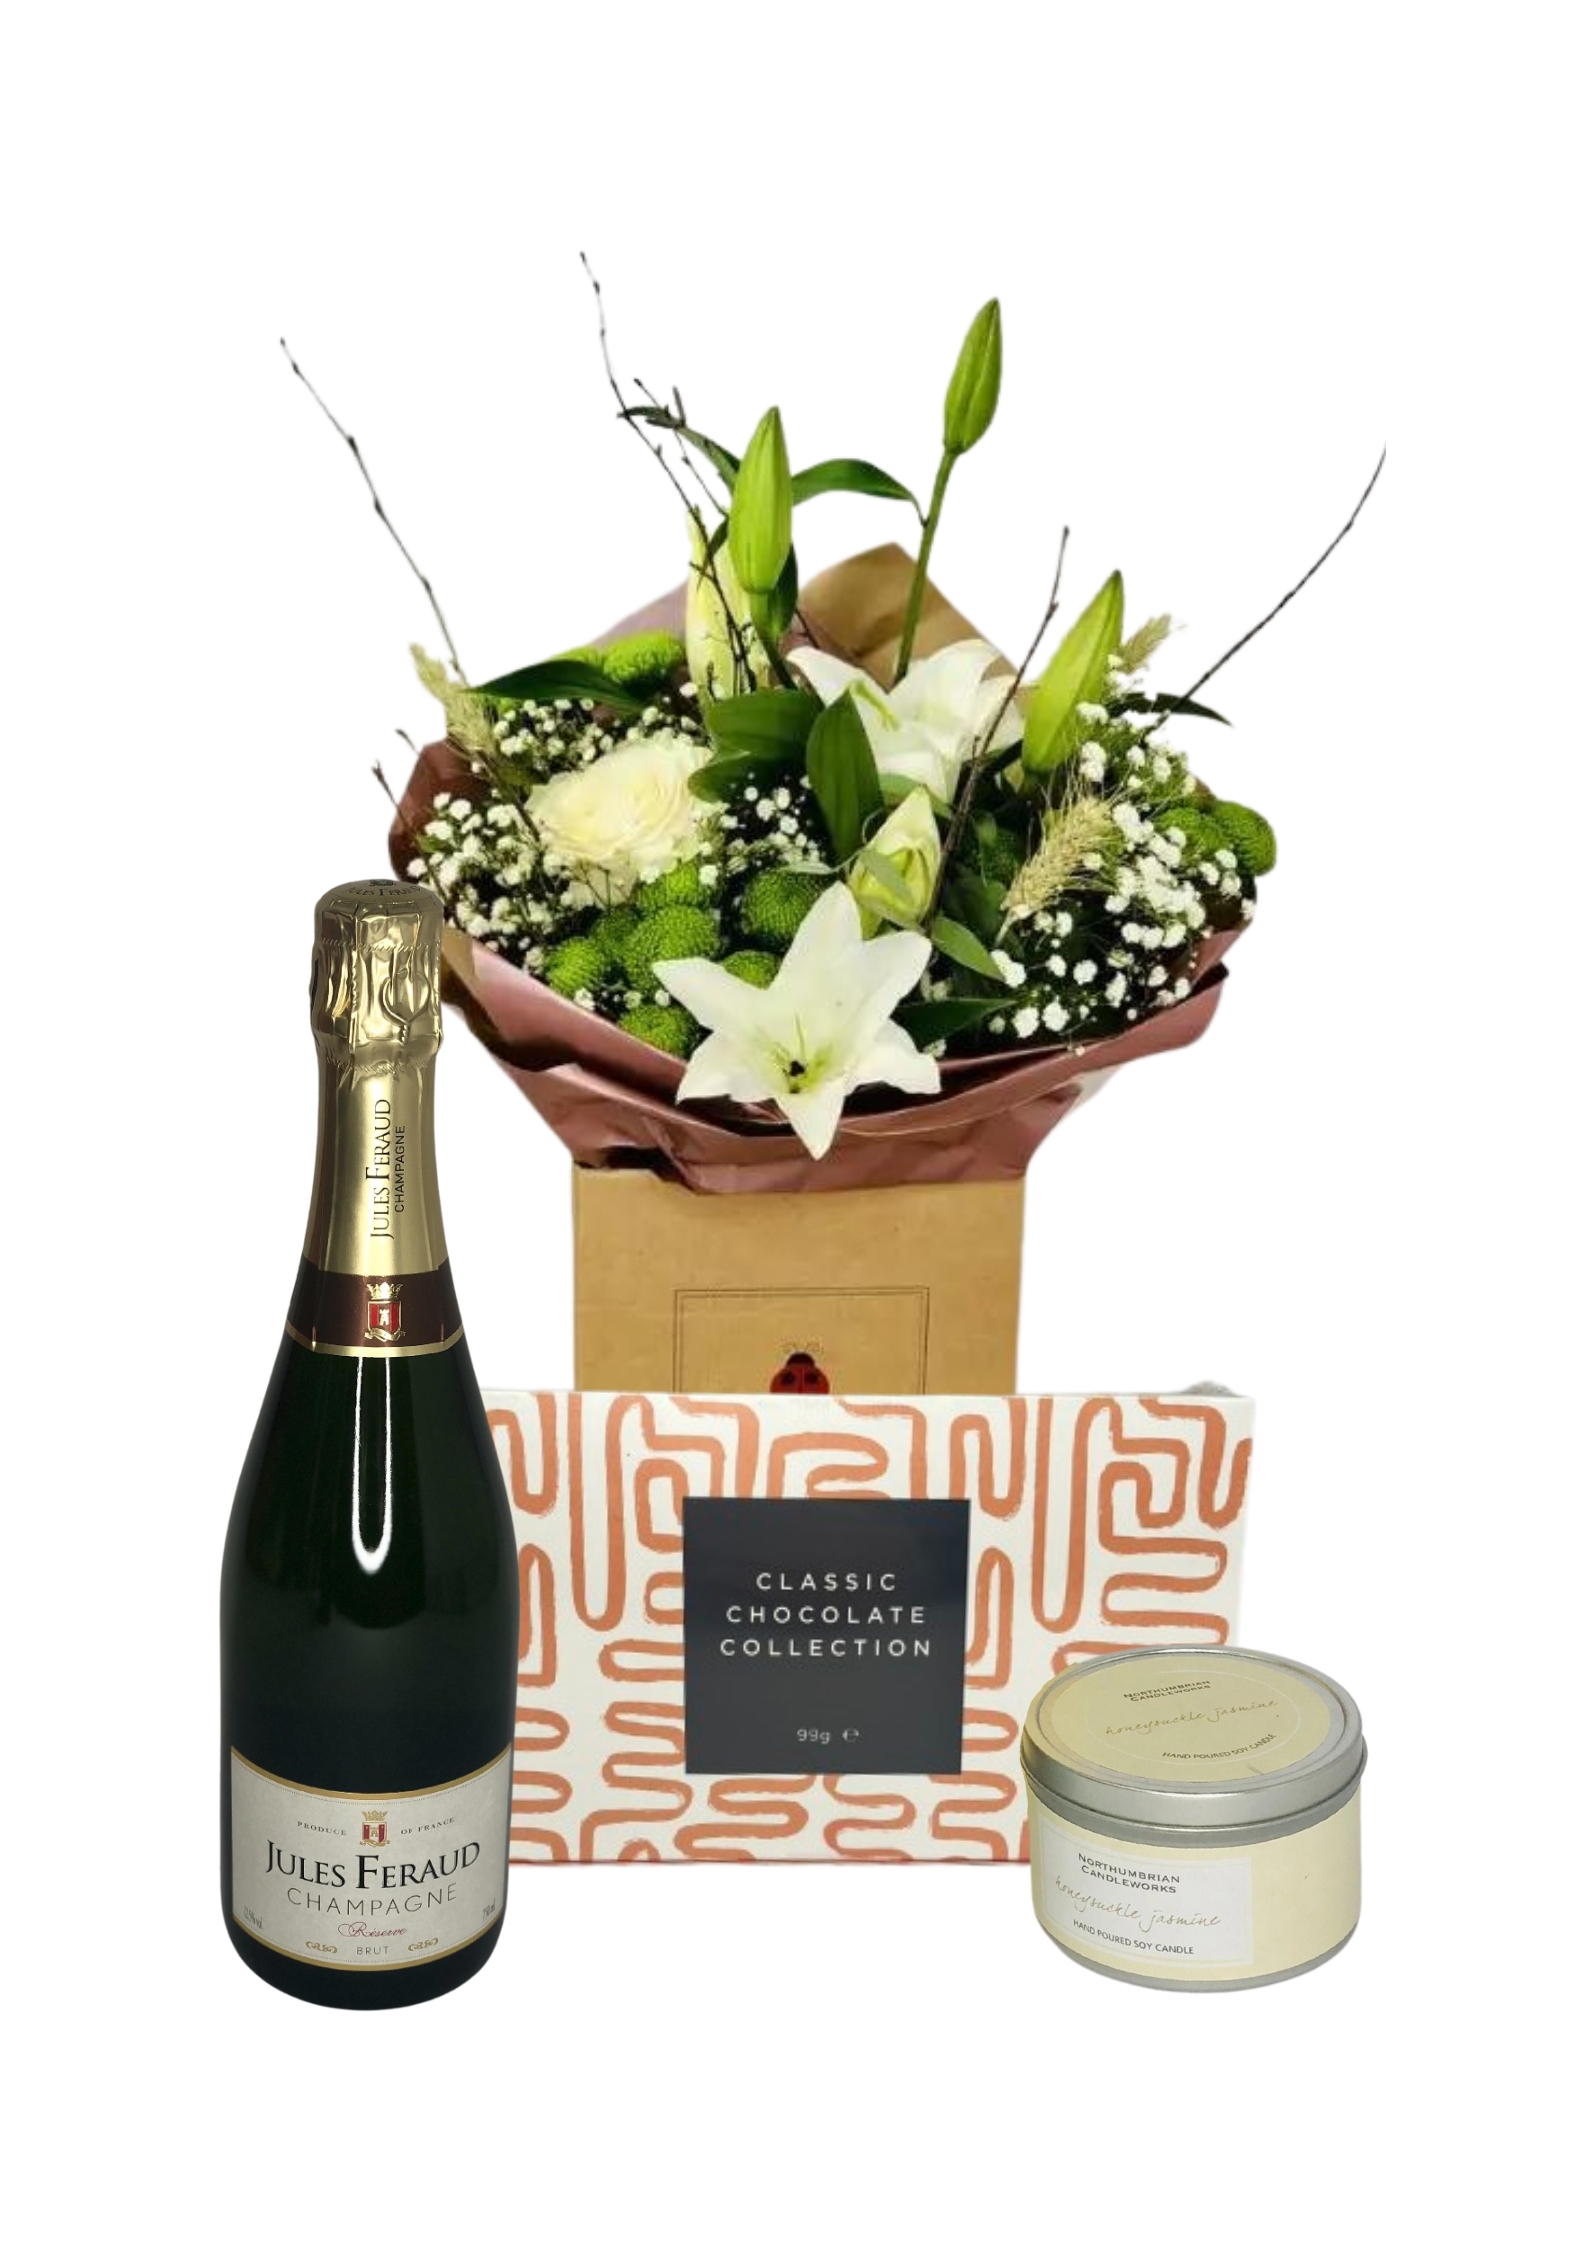 <h2>Congratulations Flowers Champagne and Scented Candle Gift Set</h2>
<br>
<ul>
<li>Approximate Dimensions of Bouquet: 50cm x 30cm</li>
<li>Flowers arranged by hand and gift wrapped in our signature eco-friendly packaging and finished off with a hidden wooden ladybird</li>
<li>To give you the best occasionally we may make substitutes</li>
<li>Our flowers backed by our 7 days freshness guarantee</li>
<li>For delivery area coverage see below</li>
</ul>
<br>
<h2>Flower Delivery Coverage</h2>
<p>Our shop delivers flowers to the following Liverpool postcodes L1 L2 L3 L4 L5 L6 L7 L8 L11 L12 L13 L14 L15 L16 L17 L18 L19 L24 L25 L26 L27 L36 L70 If your order is for an area outside of these we can organise delivery for you through our network of florists. We will ask them to make as close as possible to the image but because of the difference in stock and sundry items it may not be exact.</p>
<br>
<h2>Hand-tied Bouquet | Gift Set</h2>
<p>This Gift Set contains a beautiful white and green bouquet of flowers, which is hand-arranged by our professional florists, together with a bottle of Jules Feraud Champagne and an eco-friendly soy scented candle in Vanilla and Orange which comes in a stylish tin. This is a delightful gift for someone celebrating any occasion.</p>
<p>Handtied bouquets are a lovely display of fresh flowers that have the wow factor. The advantage of having a bouquet made this way is that they are artfully arranged by our florists and tied so that they stay in the display.</p>
<p>They are then gift wrapped and aqua packed in a water bubble so that at no point are the flowers out of water. This means they look their very best on the day they arrive and continue to delight for days after.</p>
<p>Being delivered in a transporter box and in water means the recipient does not need to put the flowers in a vase straight away they can just put them down and enjoy.</p>
<p>Bouquet features 2 white oriental, 5 white roses, and 2 white lisianthus, together with mixed seasonal foliage including eucalyptus.</p>
<br>
<h2>Eco-Friendly Liverpool Florists</h2>
<p>As florists we feel very close earth and want to protect it. Plastic waste is a huge problem in the florist industry so we made the decision to make our packaging eco-friendly.</p>
<p>To achieve this we worked with our packaging supplier to remove the lamination off our boxes and wrap the tops in an Eco Flowerwrap which means it easily compostable or can be fully recycled.</p>
<p>Once you have finished enjoying your flowers from us they will go back into growing more flowers! Only a small amount of plastic is used as a water bubble and this is biodegradable.</p>
<p>Even the sachet of flower food included with your bouquet is compostable.</p>
<p>All our bouquets have small wooden ladybird hidden amongst them so do not forget to spot the ladybird and post a picture on our social media pages to enter our rolling competition.</p>
<br>
<h2>Flowers Guaranteed for 7 Days</h2>
<p>Our 7-day freshness guarantee should give you confidence that we will only send out good quality flowers.</p>
<p>Leave it in our hands we will create a marvellous bouquet which will not only look good on arrival but will continue to delight as the flowers bloom.</p>
<br>
<h2>Liverpool Flower Delivery</h2>
<p>We are open 7 days a week and offer advanced booking flower delivery same-day flower delivery 3-hour flower delivery. Guaranteed AM PM or Evening Flower Delivery and also offer Sunday Flower Delivery.</p>
<p>Our florists deliver in Liverpool and can provide flowers for you in Liverpool Merseyside. And through our network of florists can organise flower deliveries for you nationwide.</p>
<br>
<h2>The Best Florist in Liverpool your local Liverpool Flower Shop</h2>
<p>Come to Booker Flowers and Gifts Liverpool for your beautiful flowers and plants. For that bit of extra luxury we also offer a lovely range of finishing touches such as wines champagne locally crafted Gin and Rum Vases Scented Candles and Chocolates that can be delivered with your flowers.</p>
<p>To see the full range see our extras section.</p>
<p>You can trust Booker Flowers and Gifts of delivery the very best for you.</p>
<p><br /><br /></p>
<p><em>5 Star review on Yell.com</em></p>
<br>
<p><em>Thank you Gemma for your fabulous service. The flowers are of the highest quality and delivered with a warm smile. My sister was delighted. Ordering was simple and the communications were top-notch. I will definitely use your services again.</em></p>